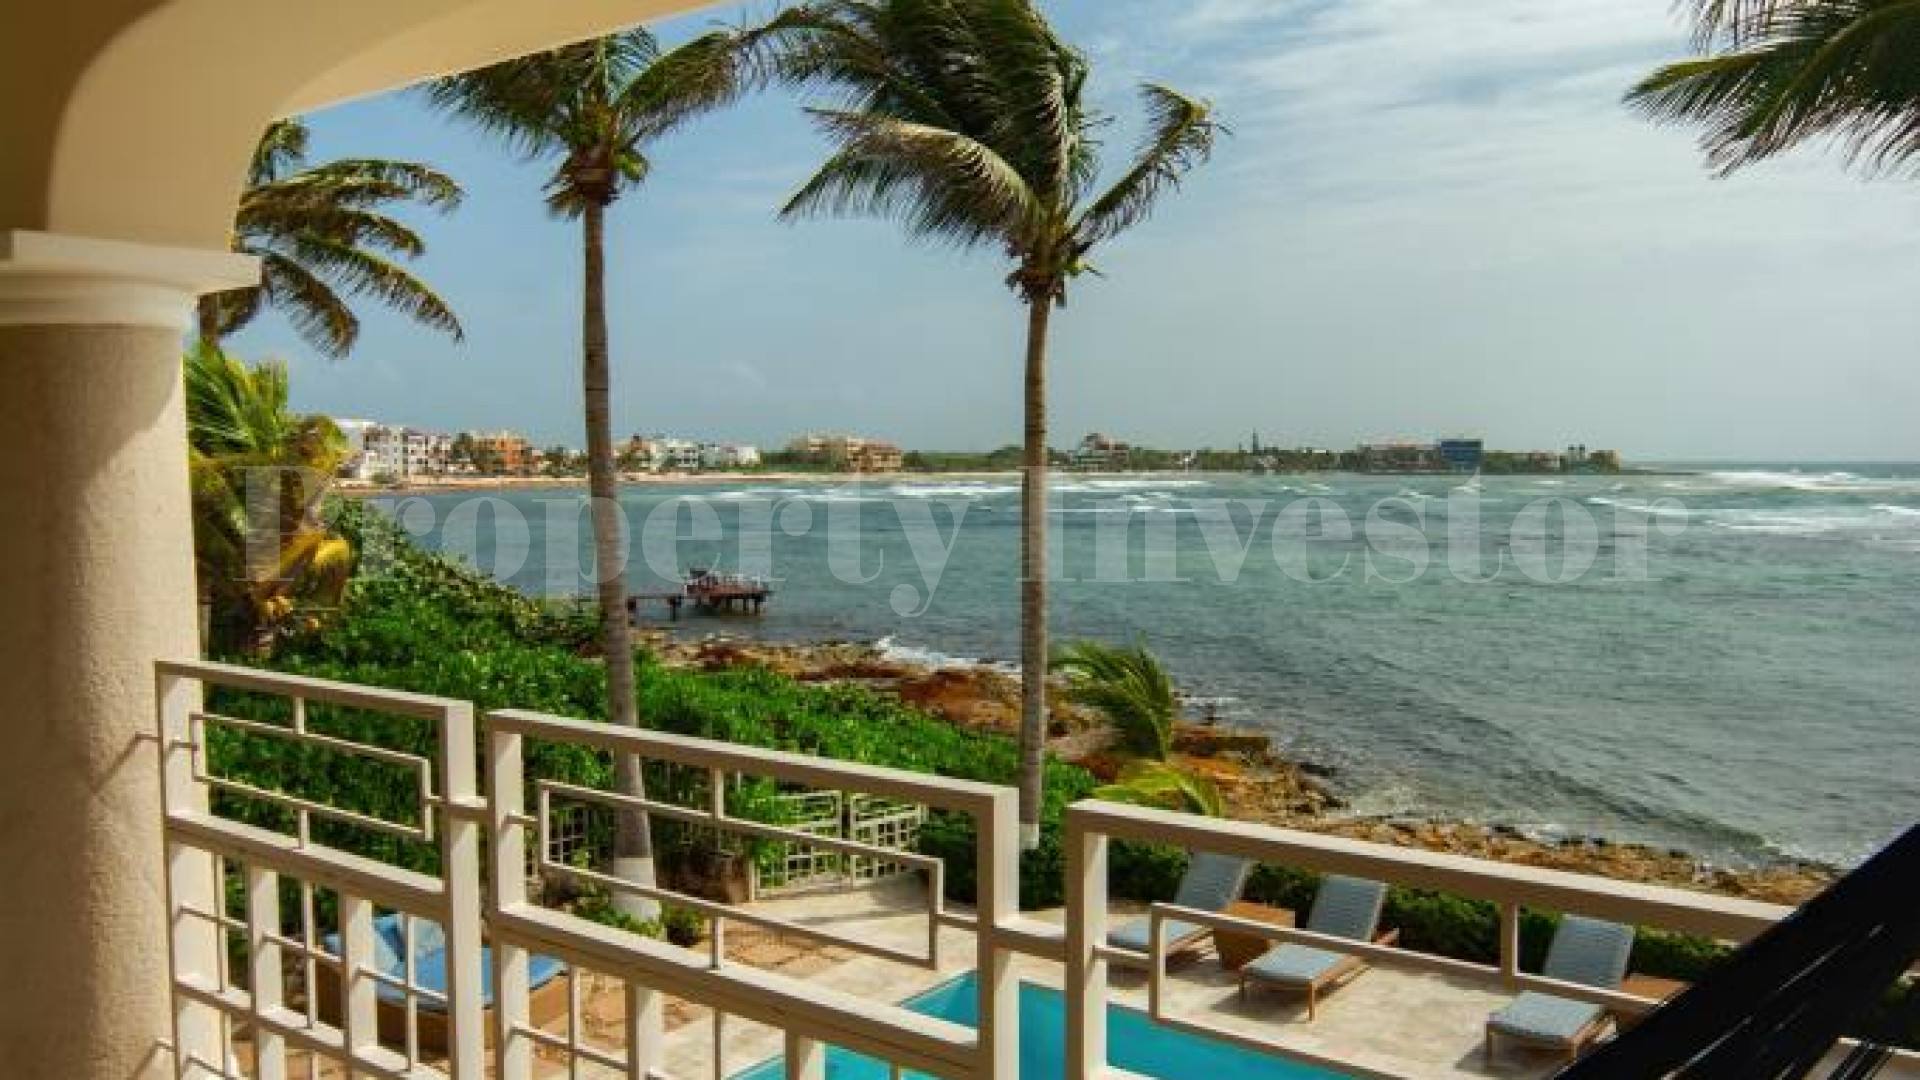 Incredible 6 Bedroom Luxury Beachfront Villa with Private Beach Access for Sale in Akumal, Mexico